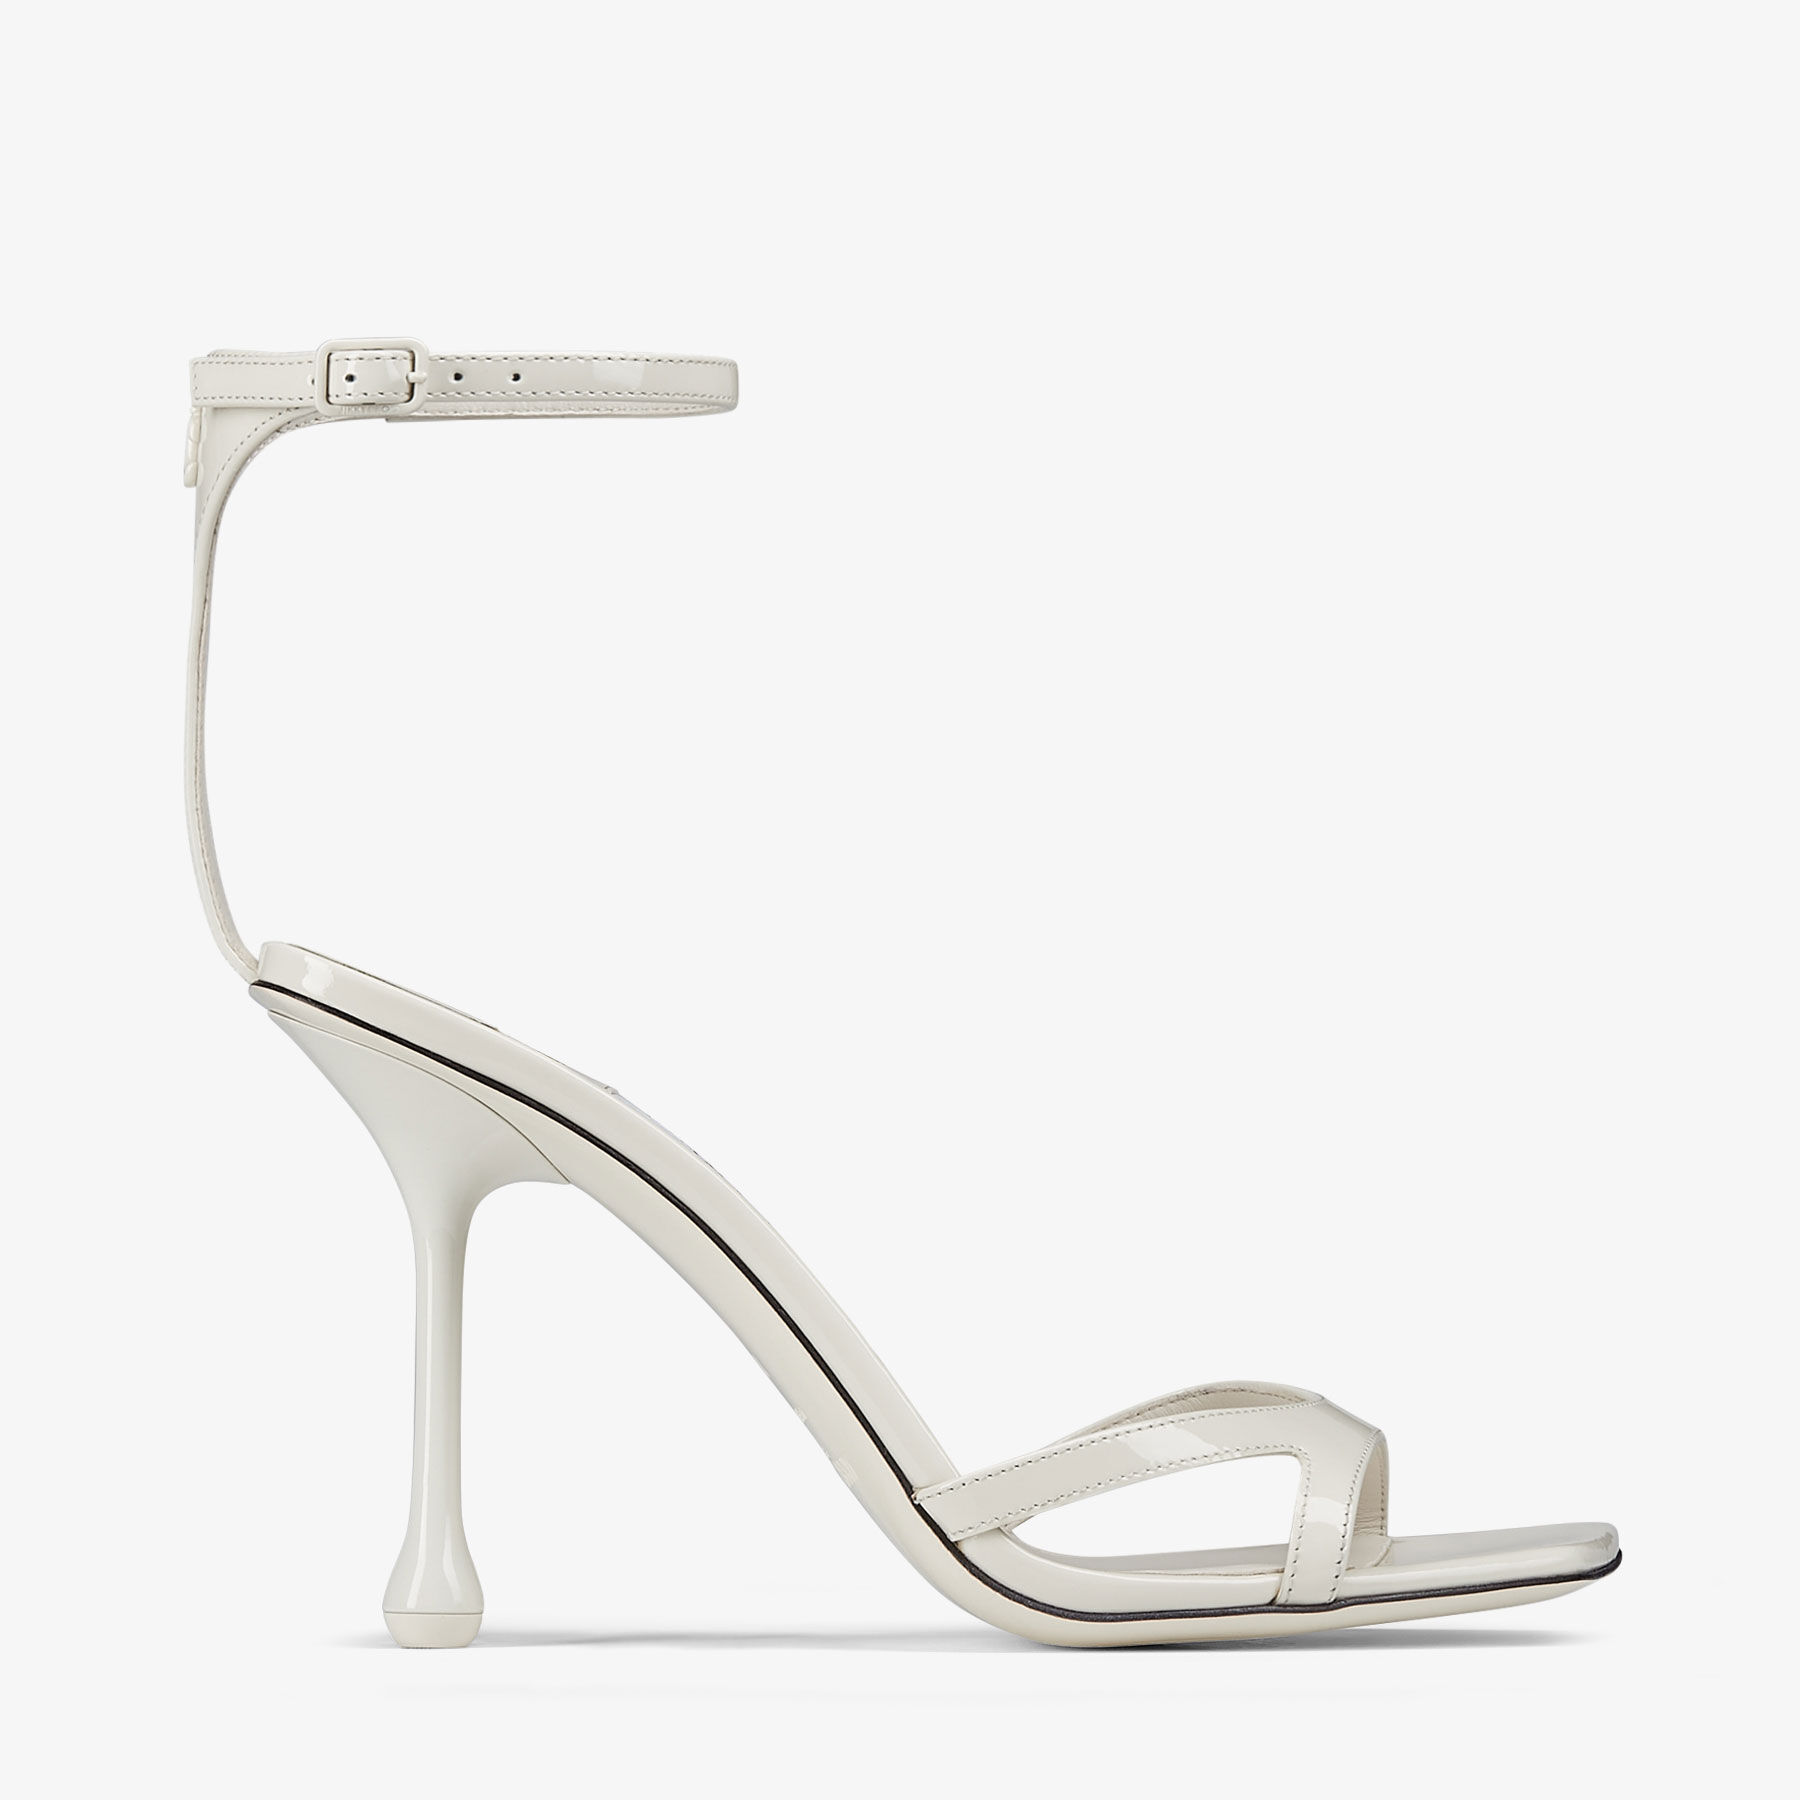 Ixia Sandal 95 | Latte Patent Leather Sandals | New Collection | JIMMY CHOO